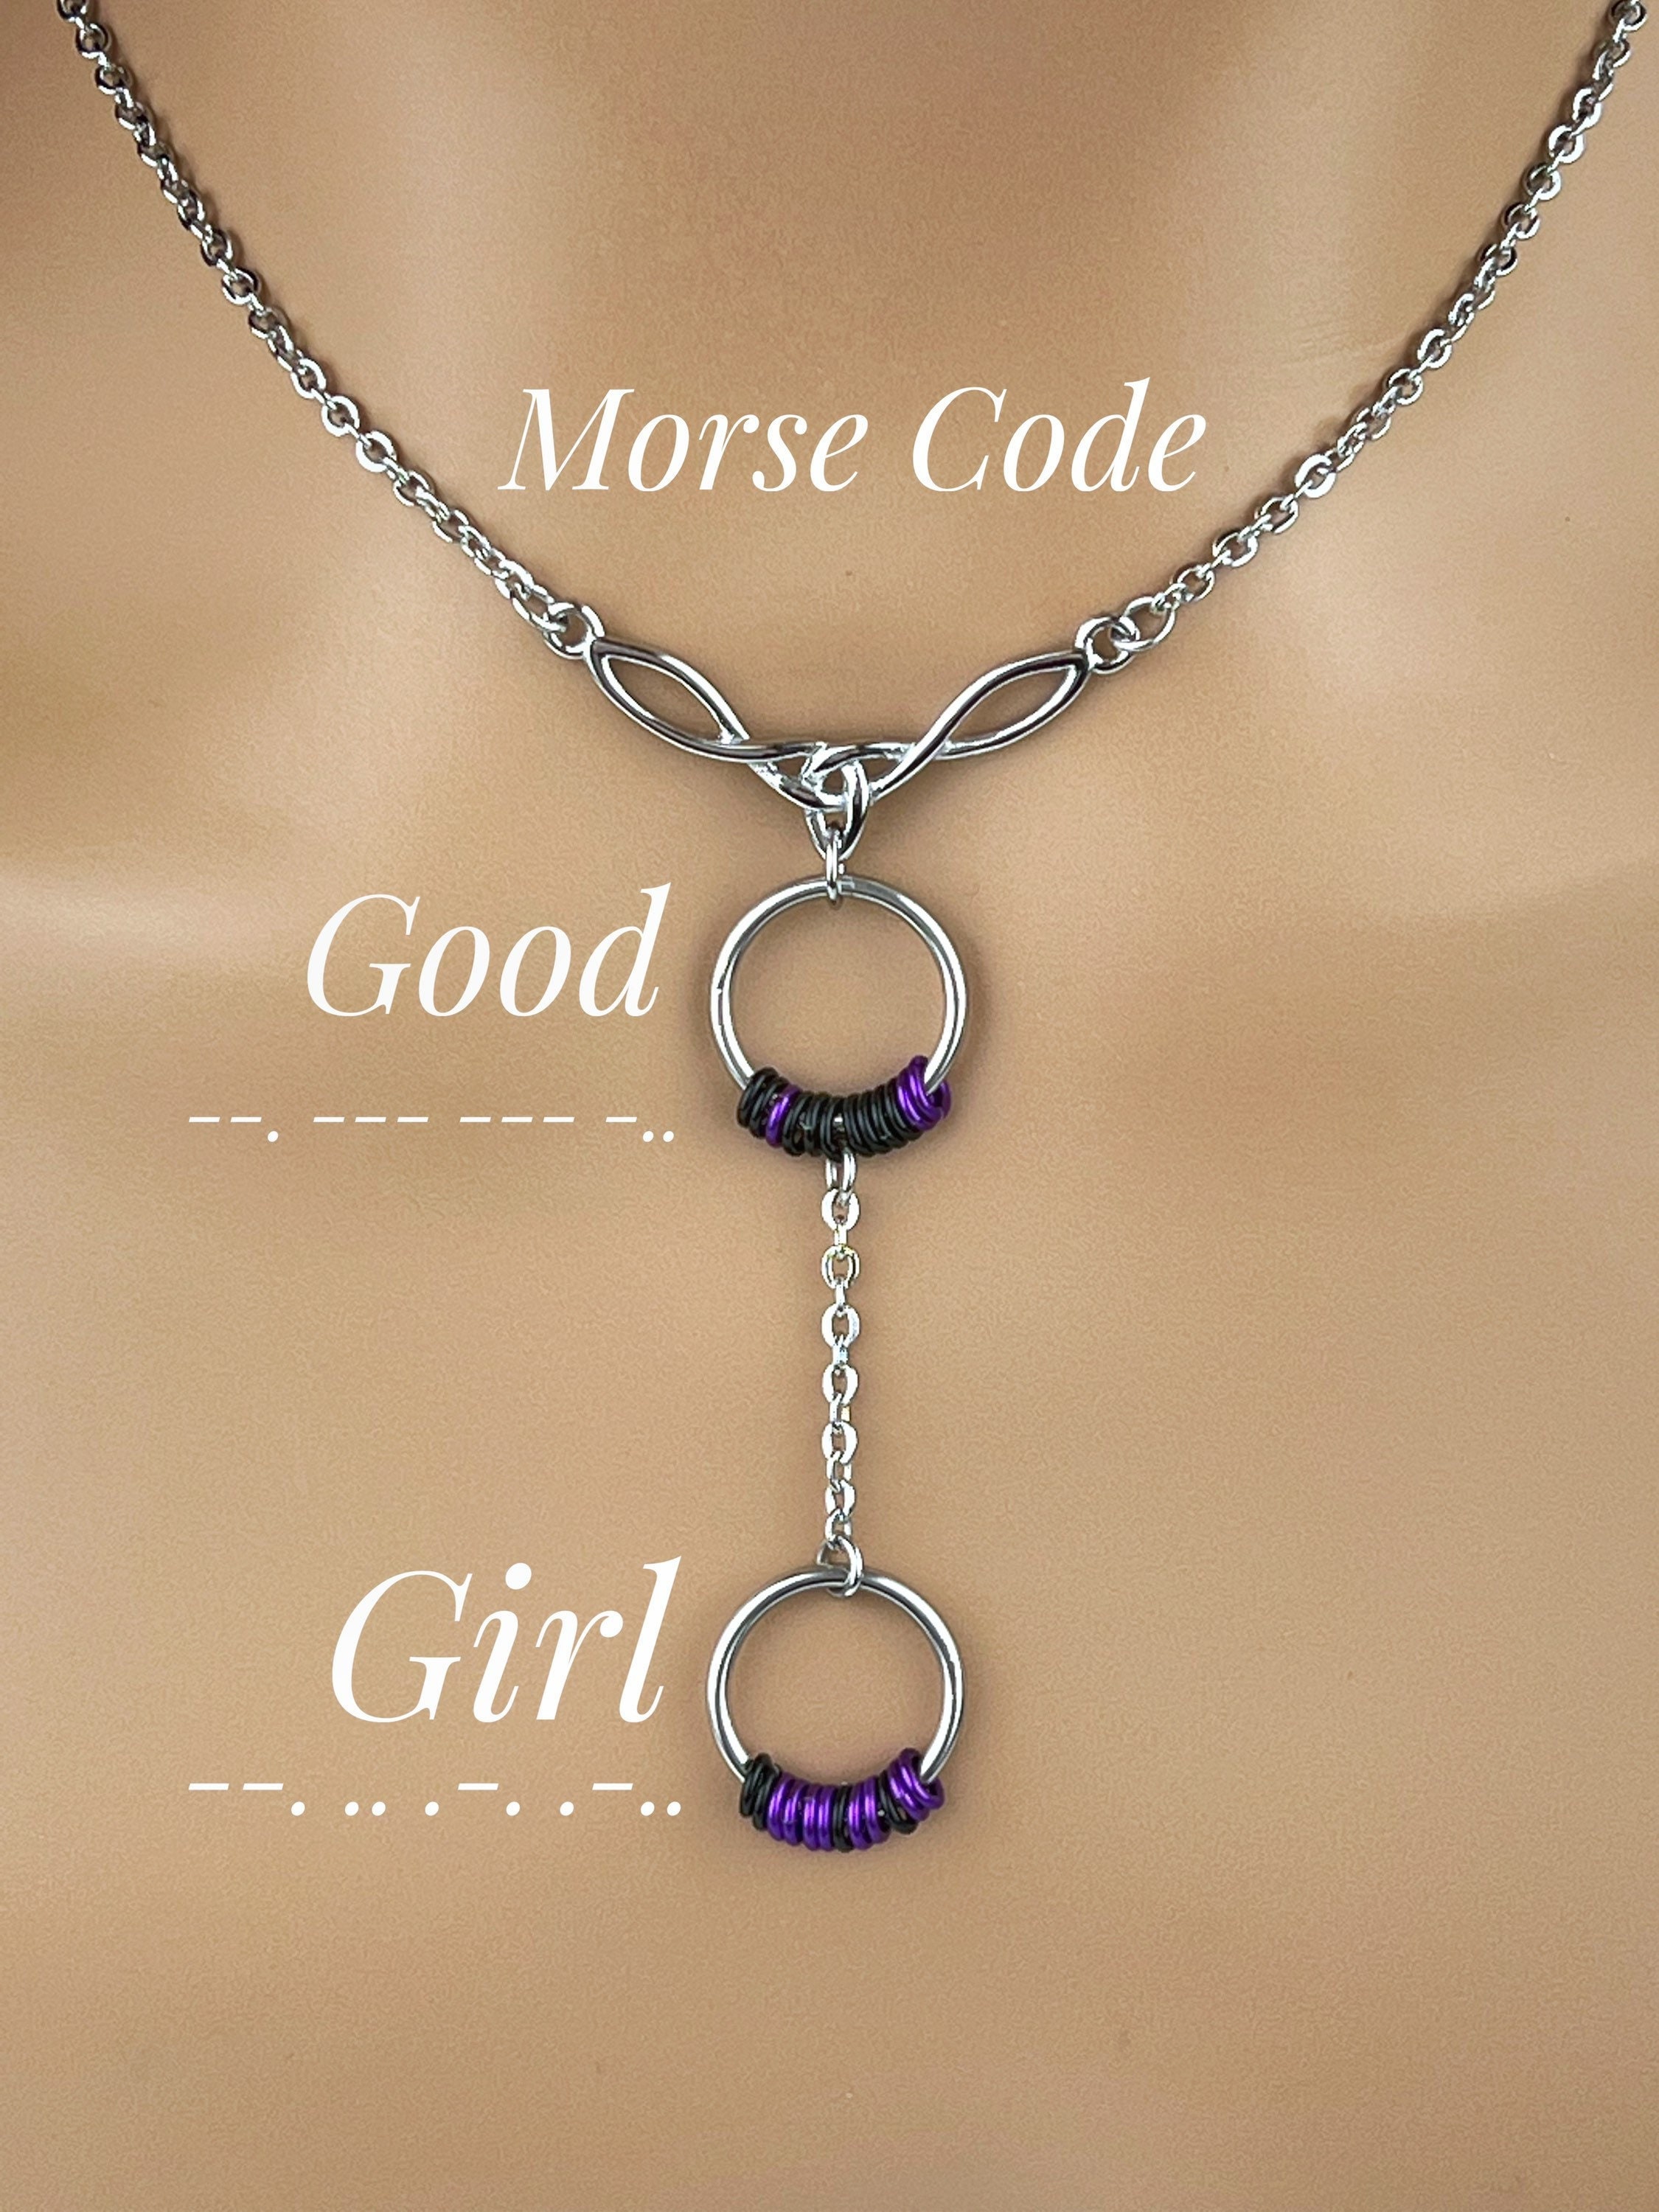 DDLG Day Collar Submissive Custom Collars for Women 22 / Non Hypoallergenic Hex Lock 5x5mm